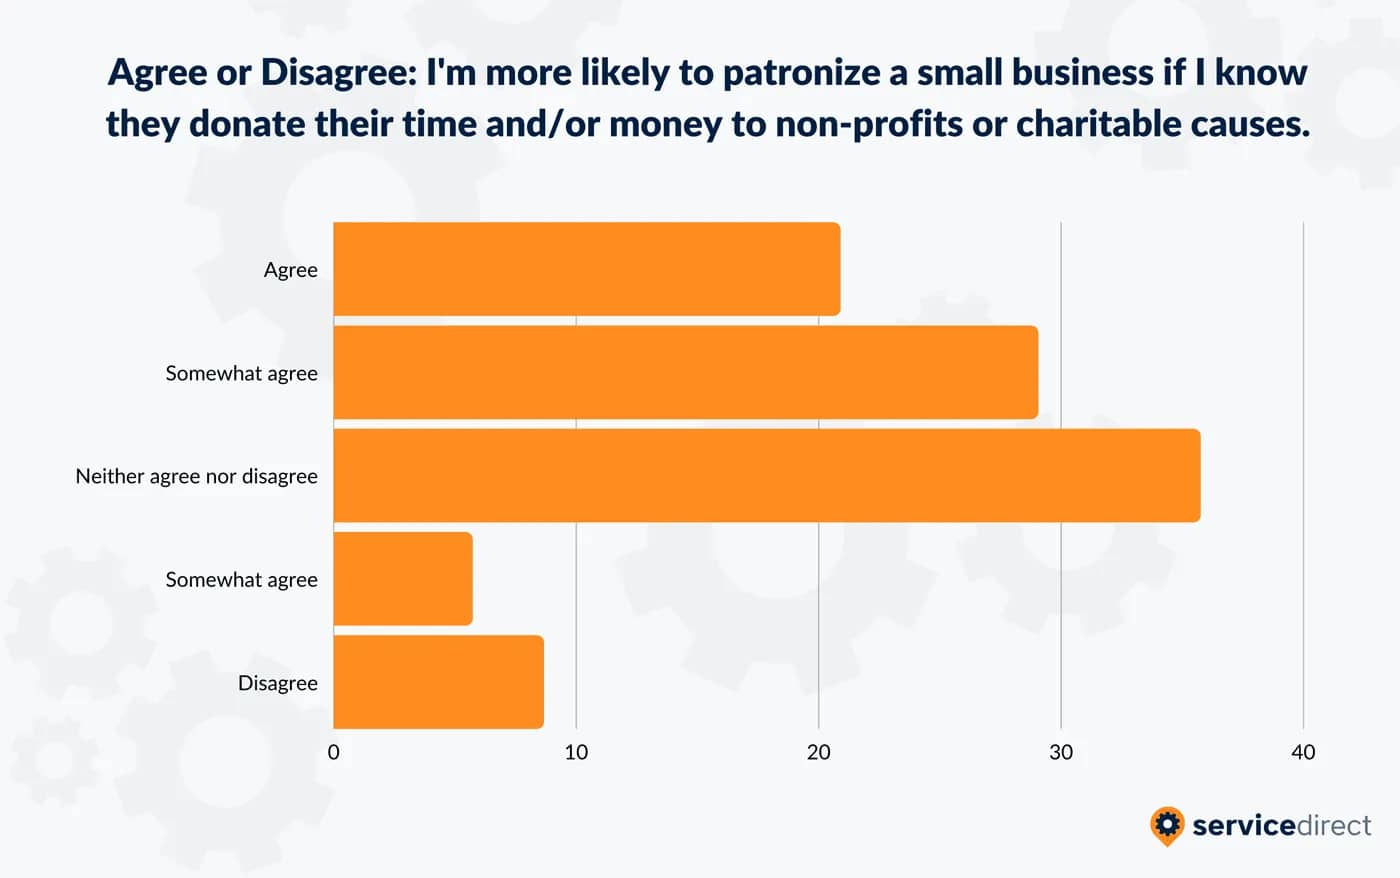 Importance-of-Charitable-Causes-When-Patronizing-Small-Business-BBB